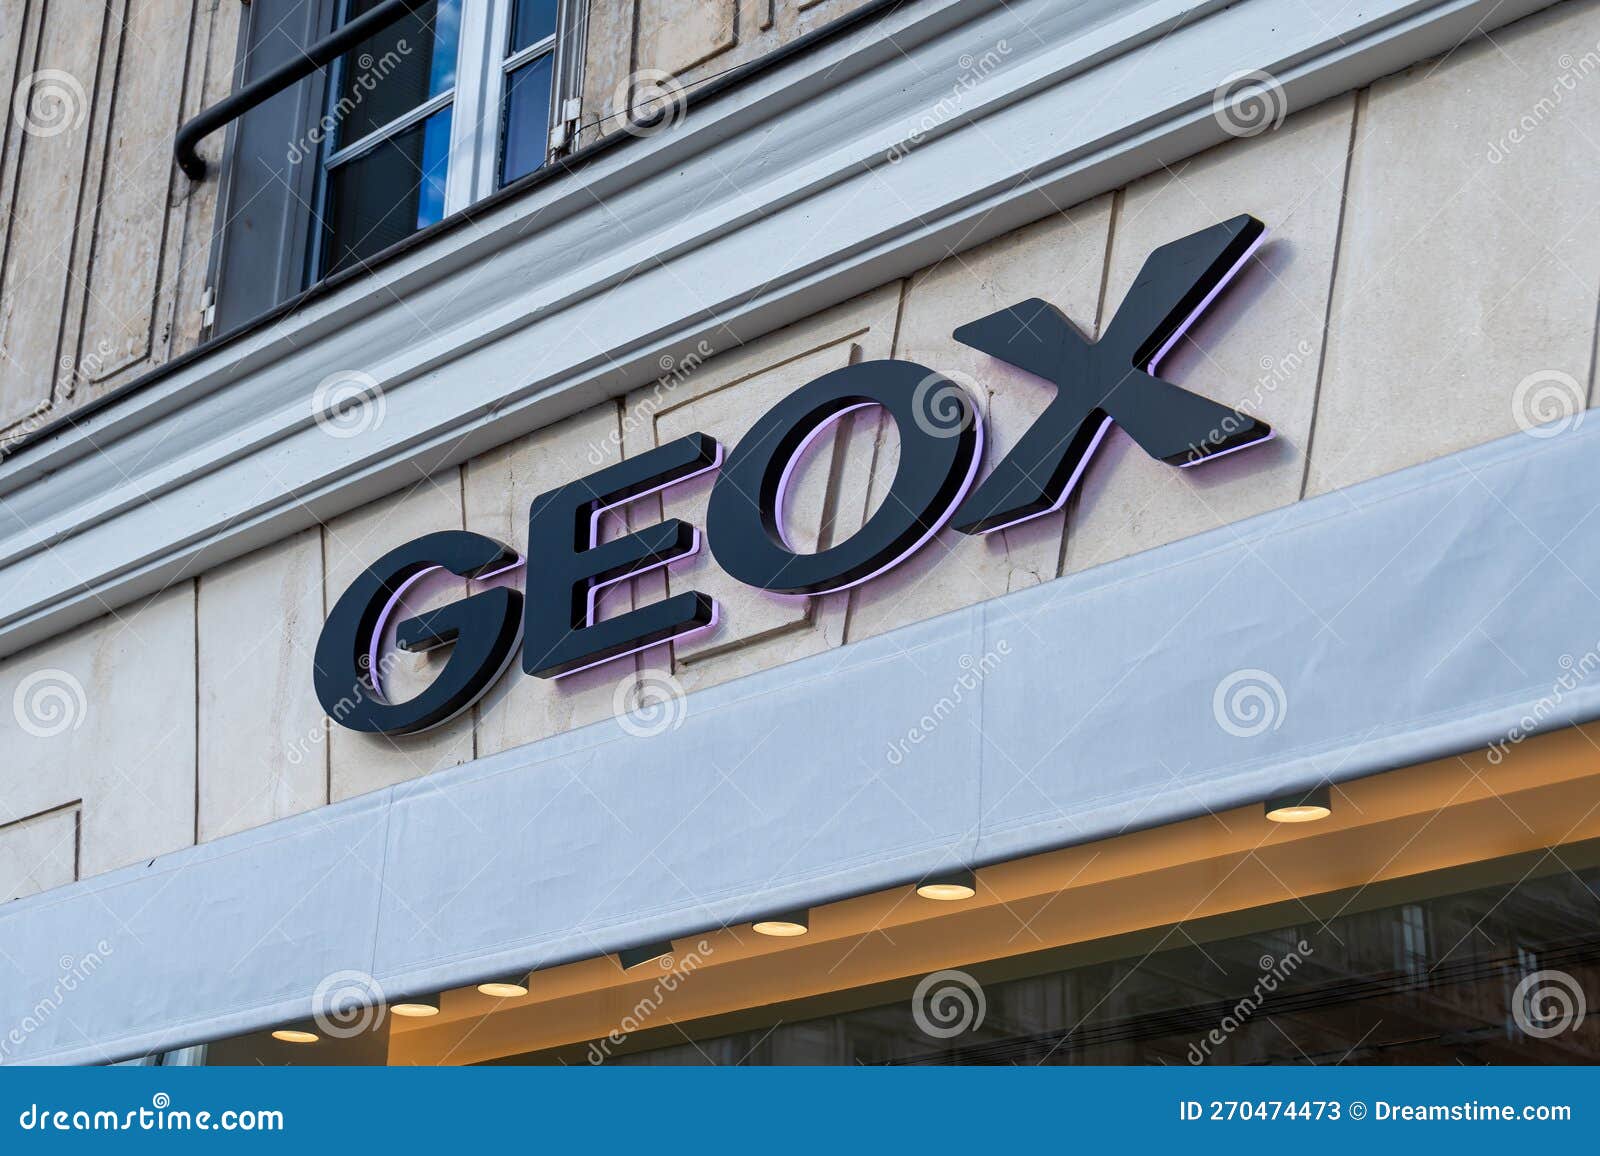 Commercial Sign of a Geox in Paris, Stock Photo - Image of fashion, 270474473